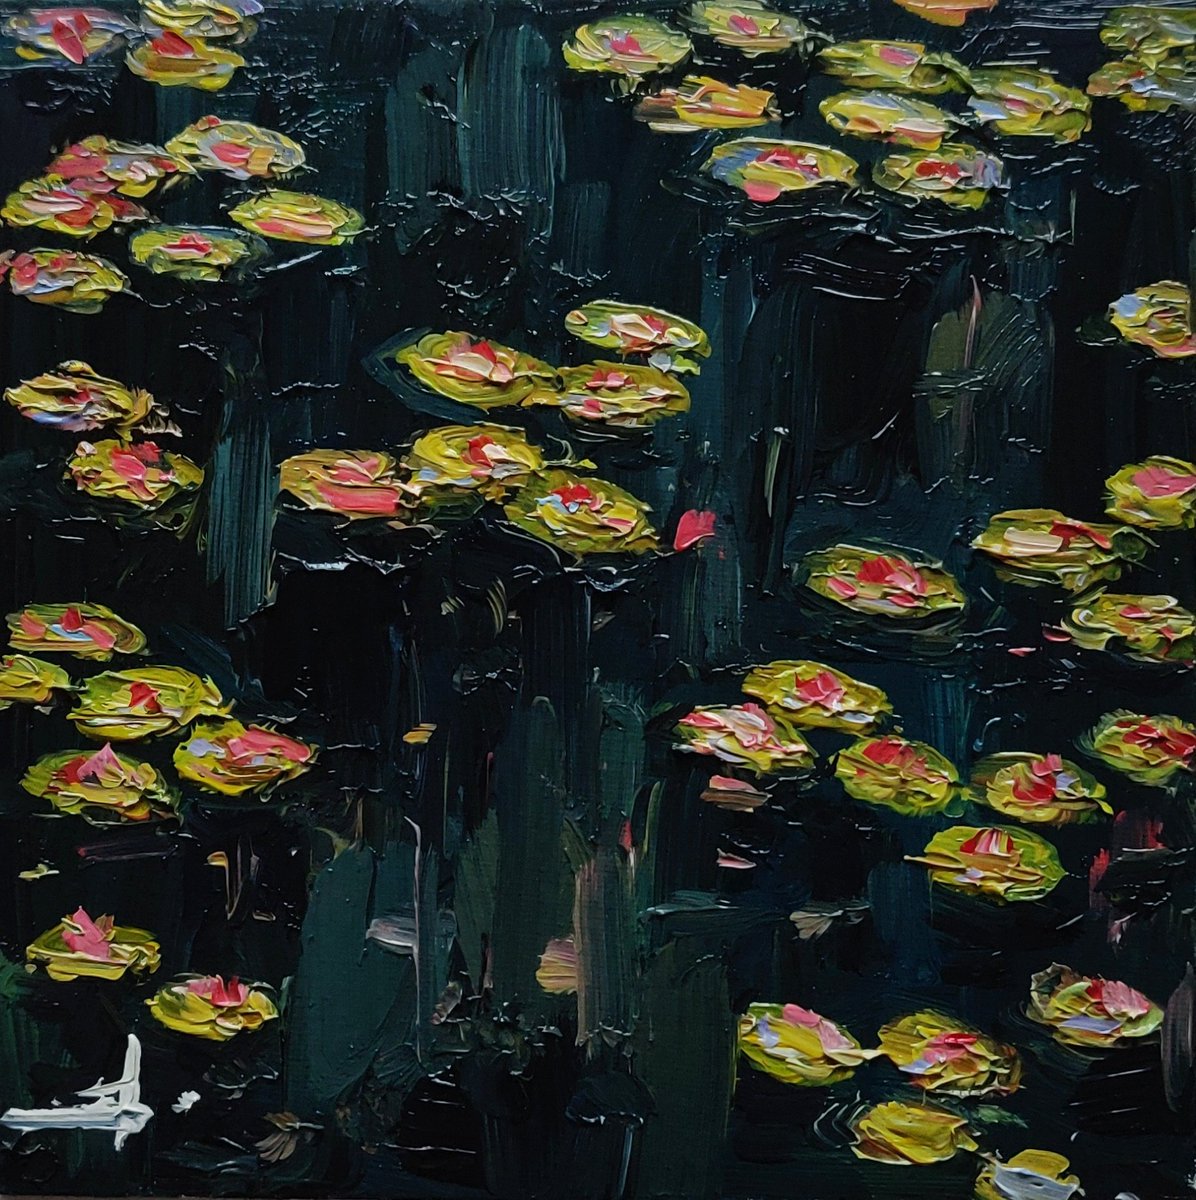 Waterlilies 8 X 8 Inches Oil on Canvas Board Available at auction #artcollectors #oilpainting #impressionism #interiordesign #homedecor #ArtLovers #impasto #artist #originalart #paintings #artforsale #monet #waterlilies